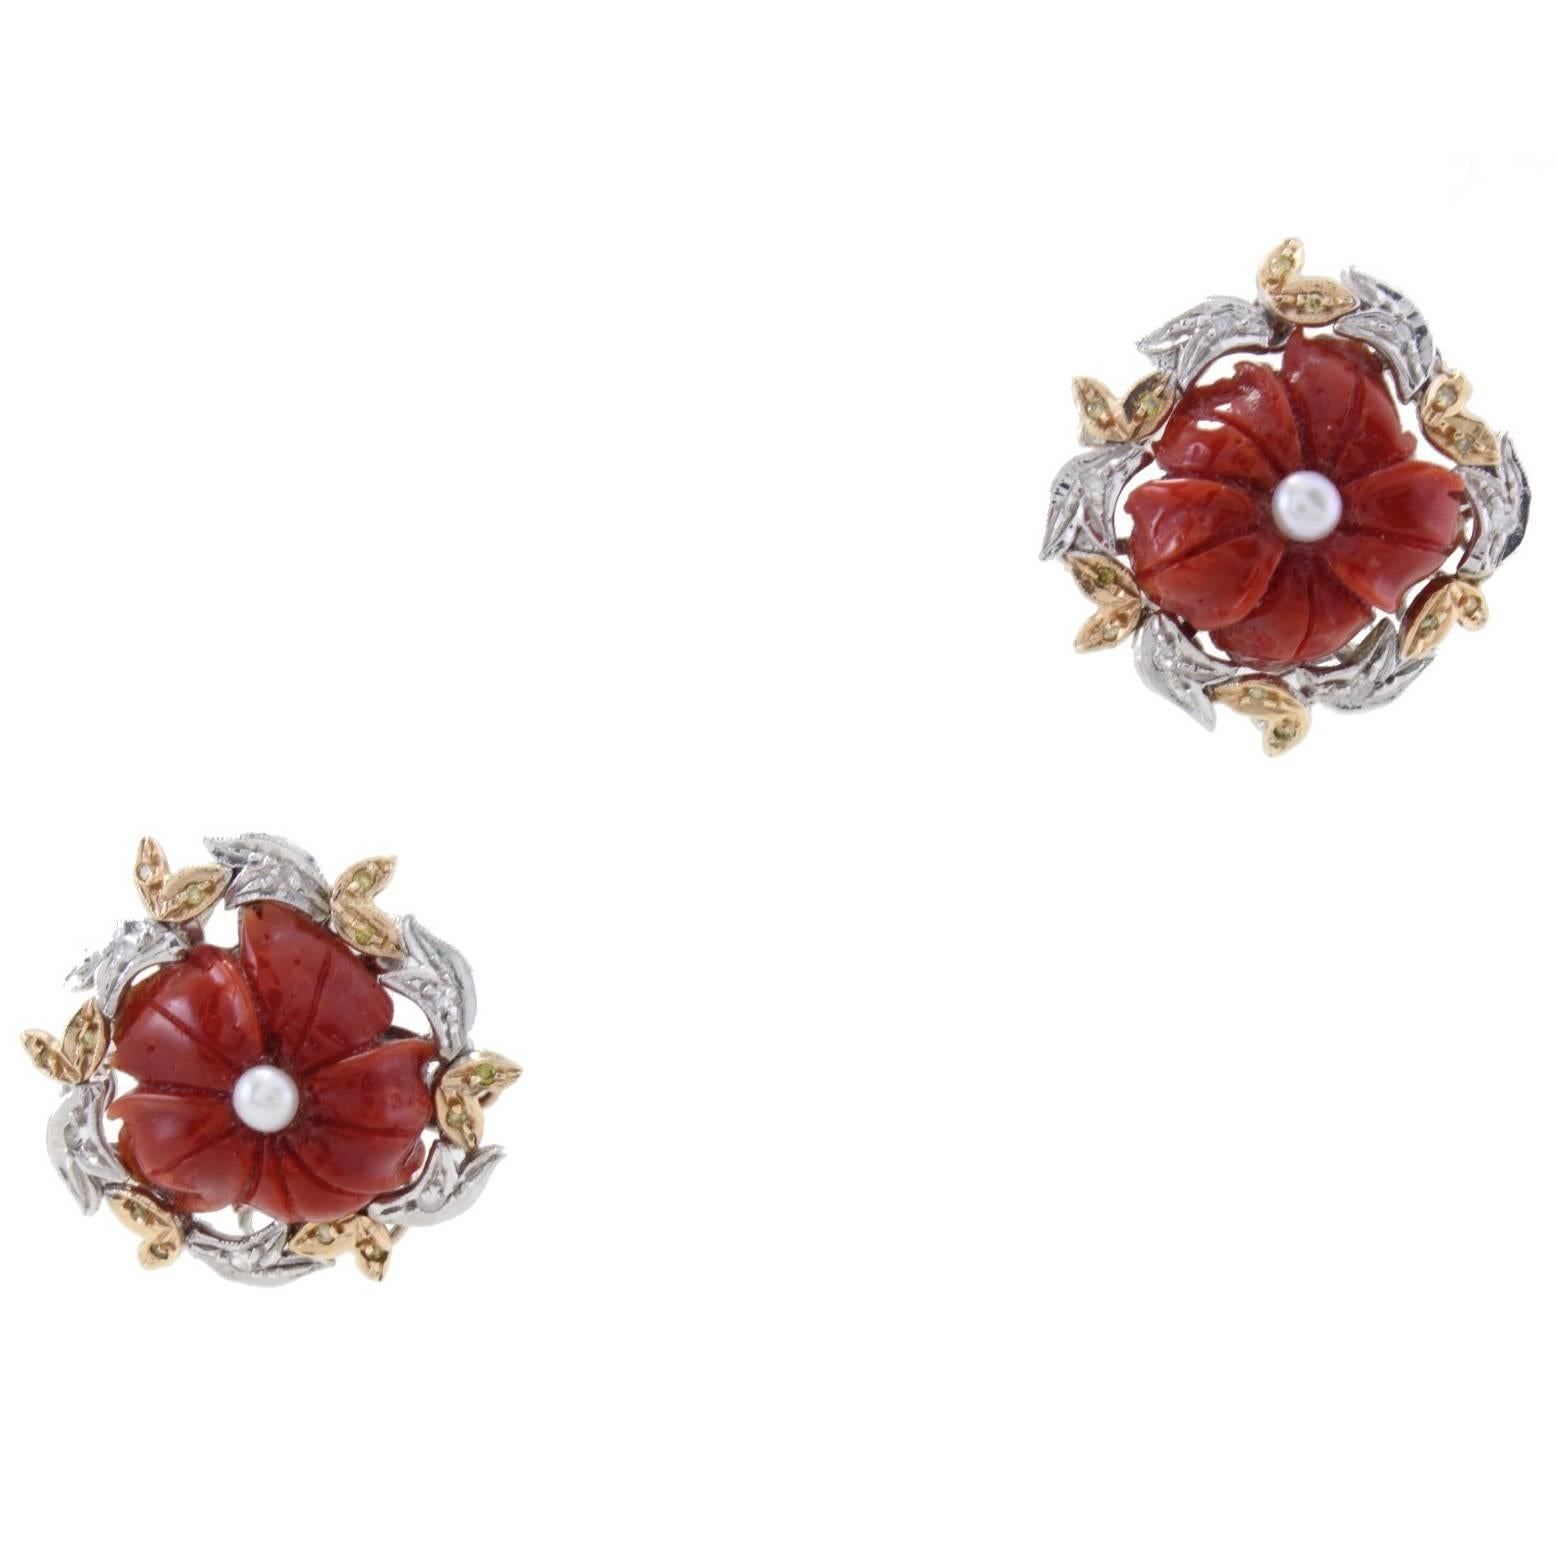 Clip-on earrings in 14k gold composed of flower shaped coral, pearls in the center and diamonds all around.
Diamonds 0.36 kt
Coral 4.10 gr
Pearls 0.10 gr
Tot.Weight 14.80
R.F gecg